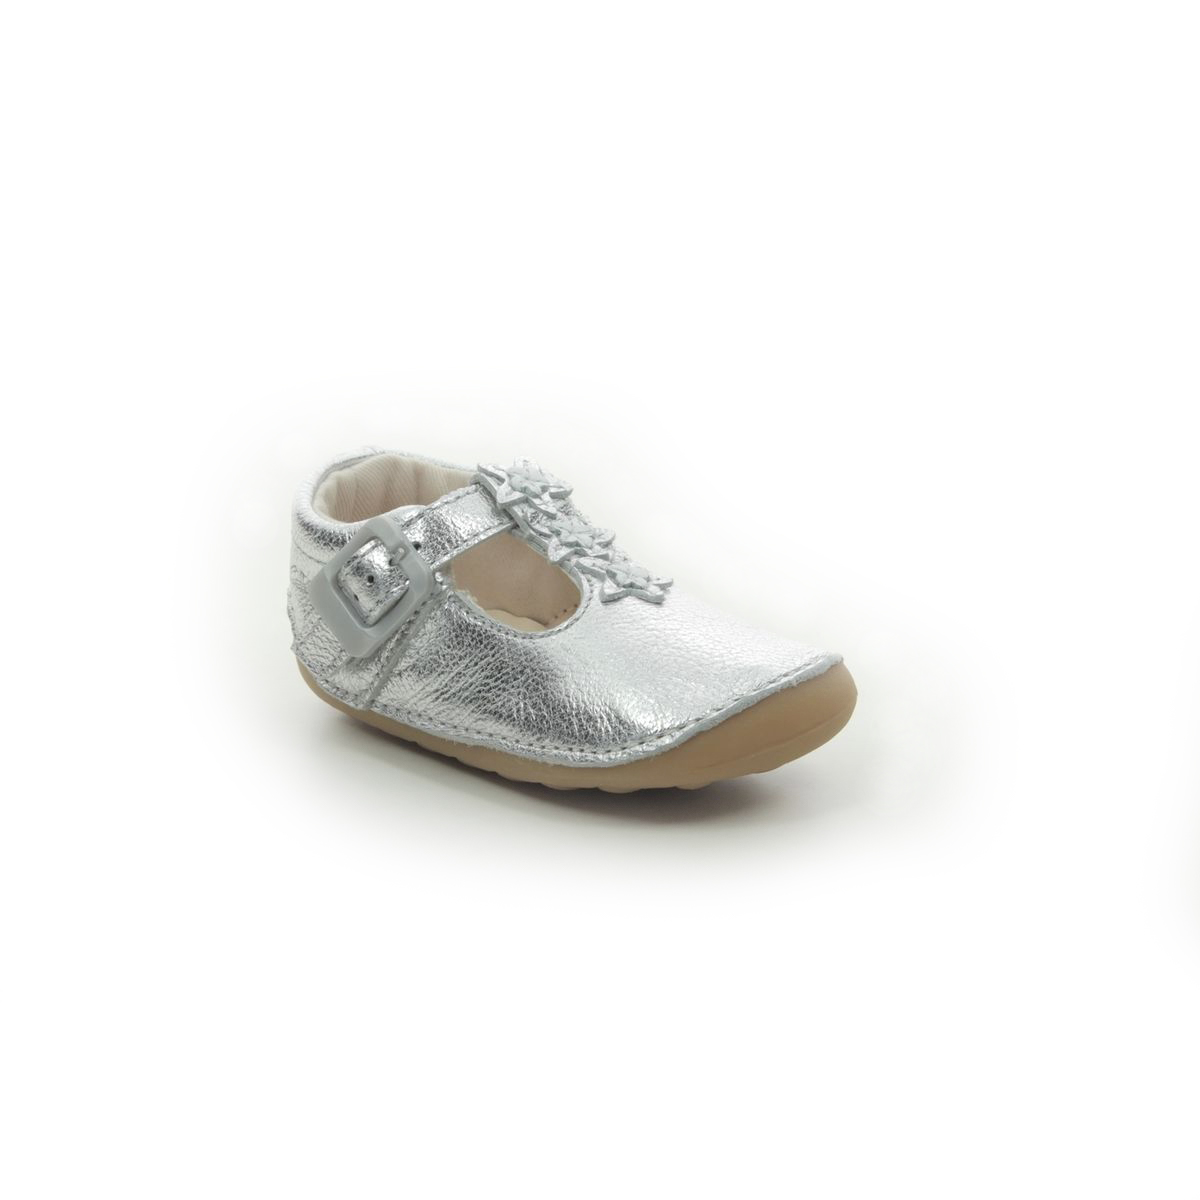 Clarks Tiny Flower T Silver Leather Kids girls first and baby shoes 5763-67G in a Plain Leather in Size 5